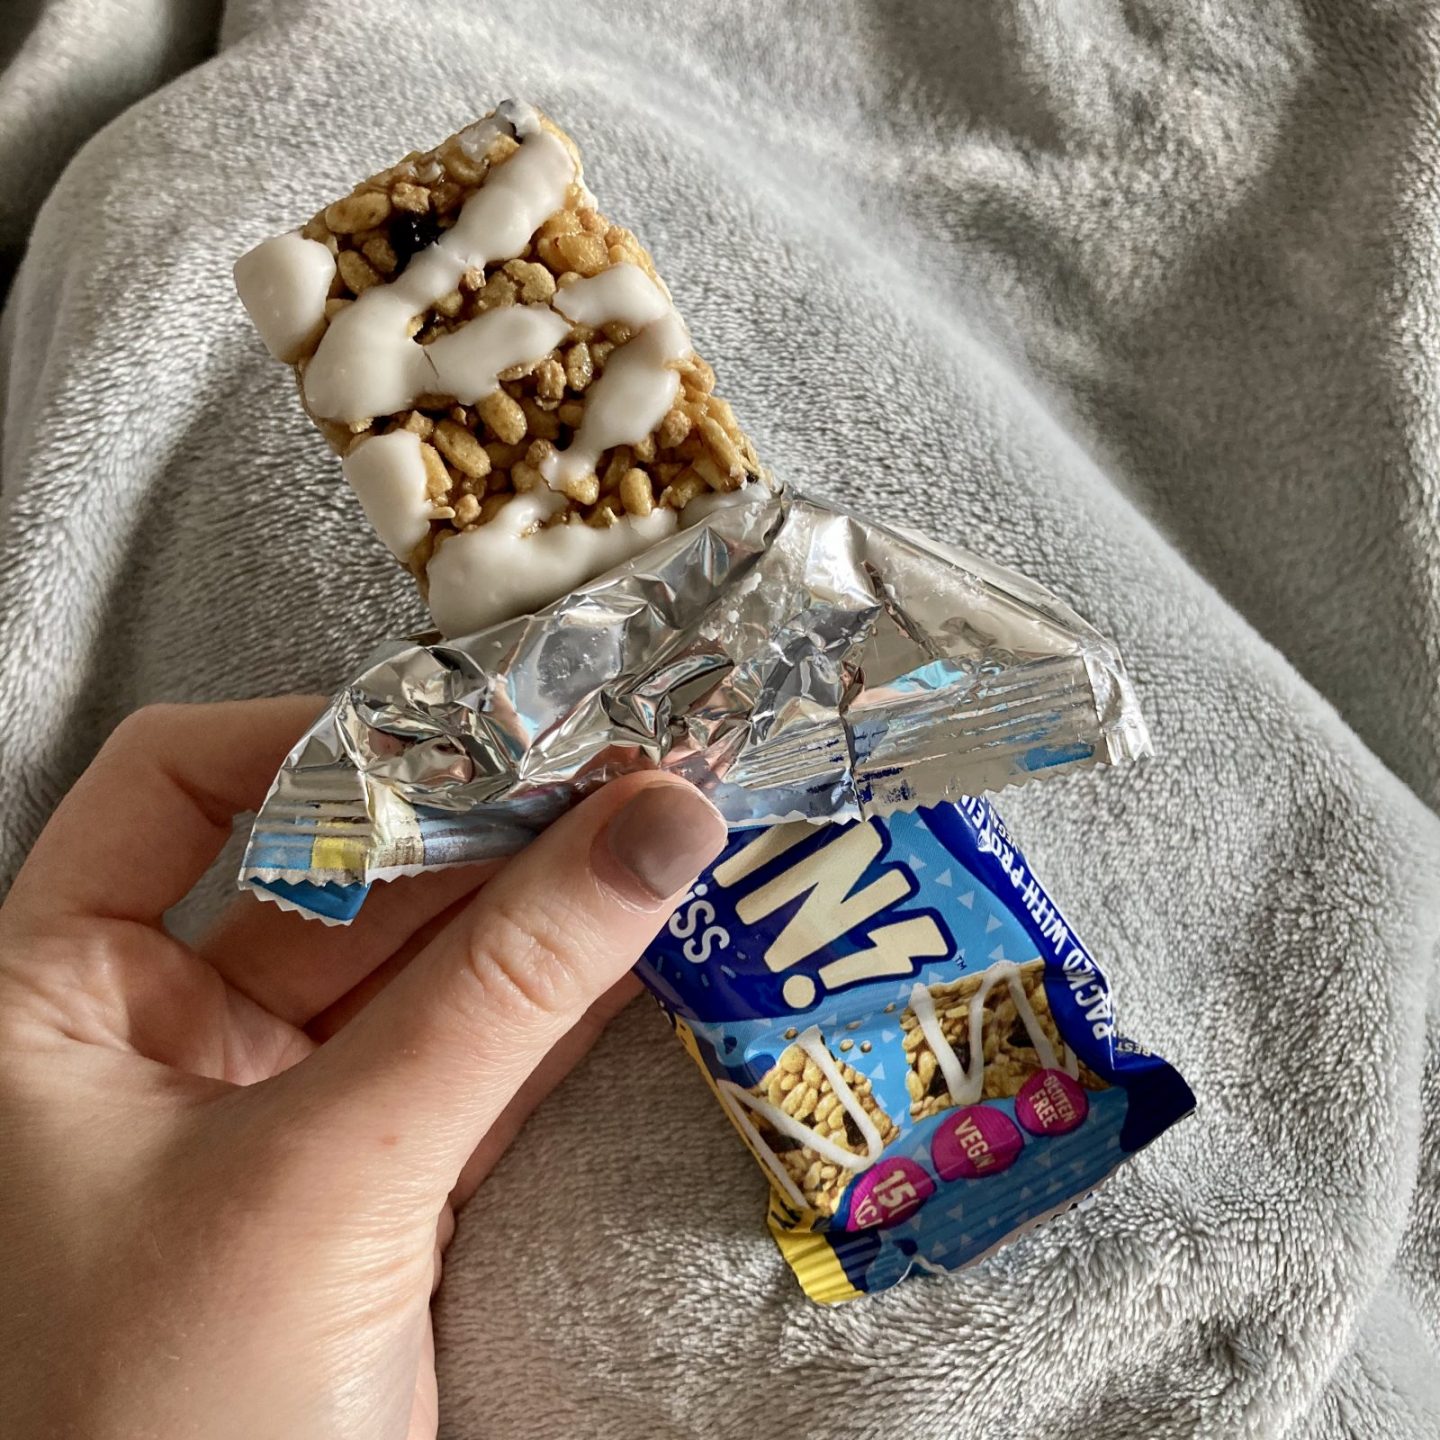 pippa's hand holding lexi's protein crispy bar, half unwrapped, showing a crunchy bar decorated with white sweet icing